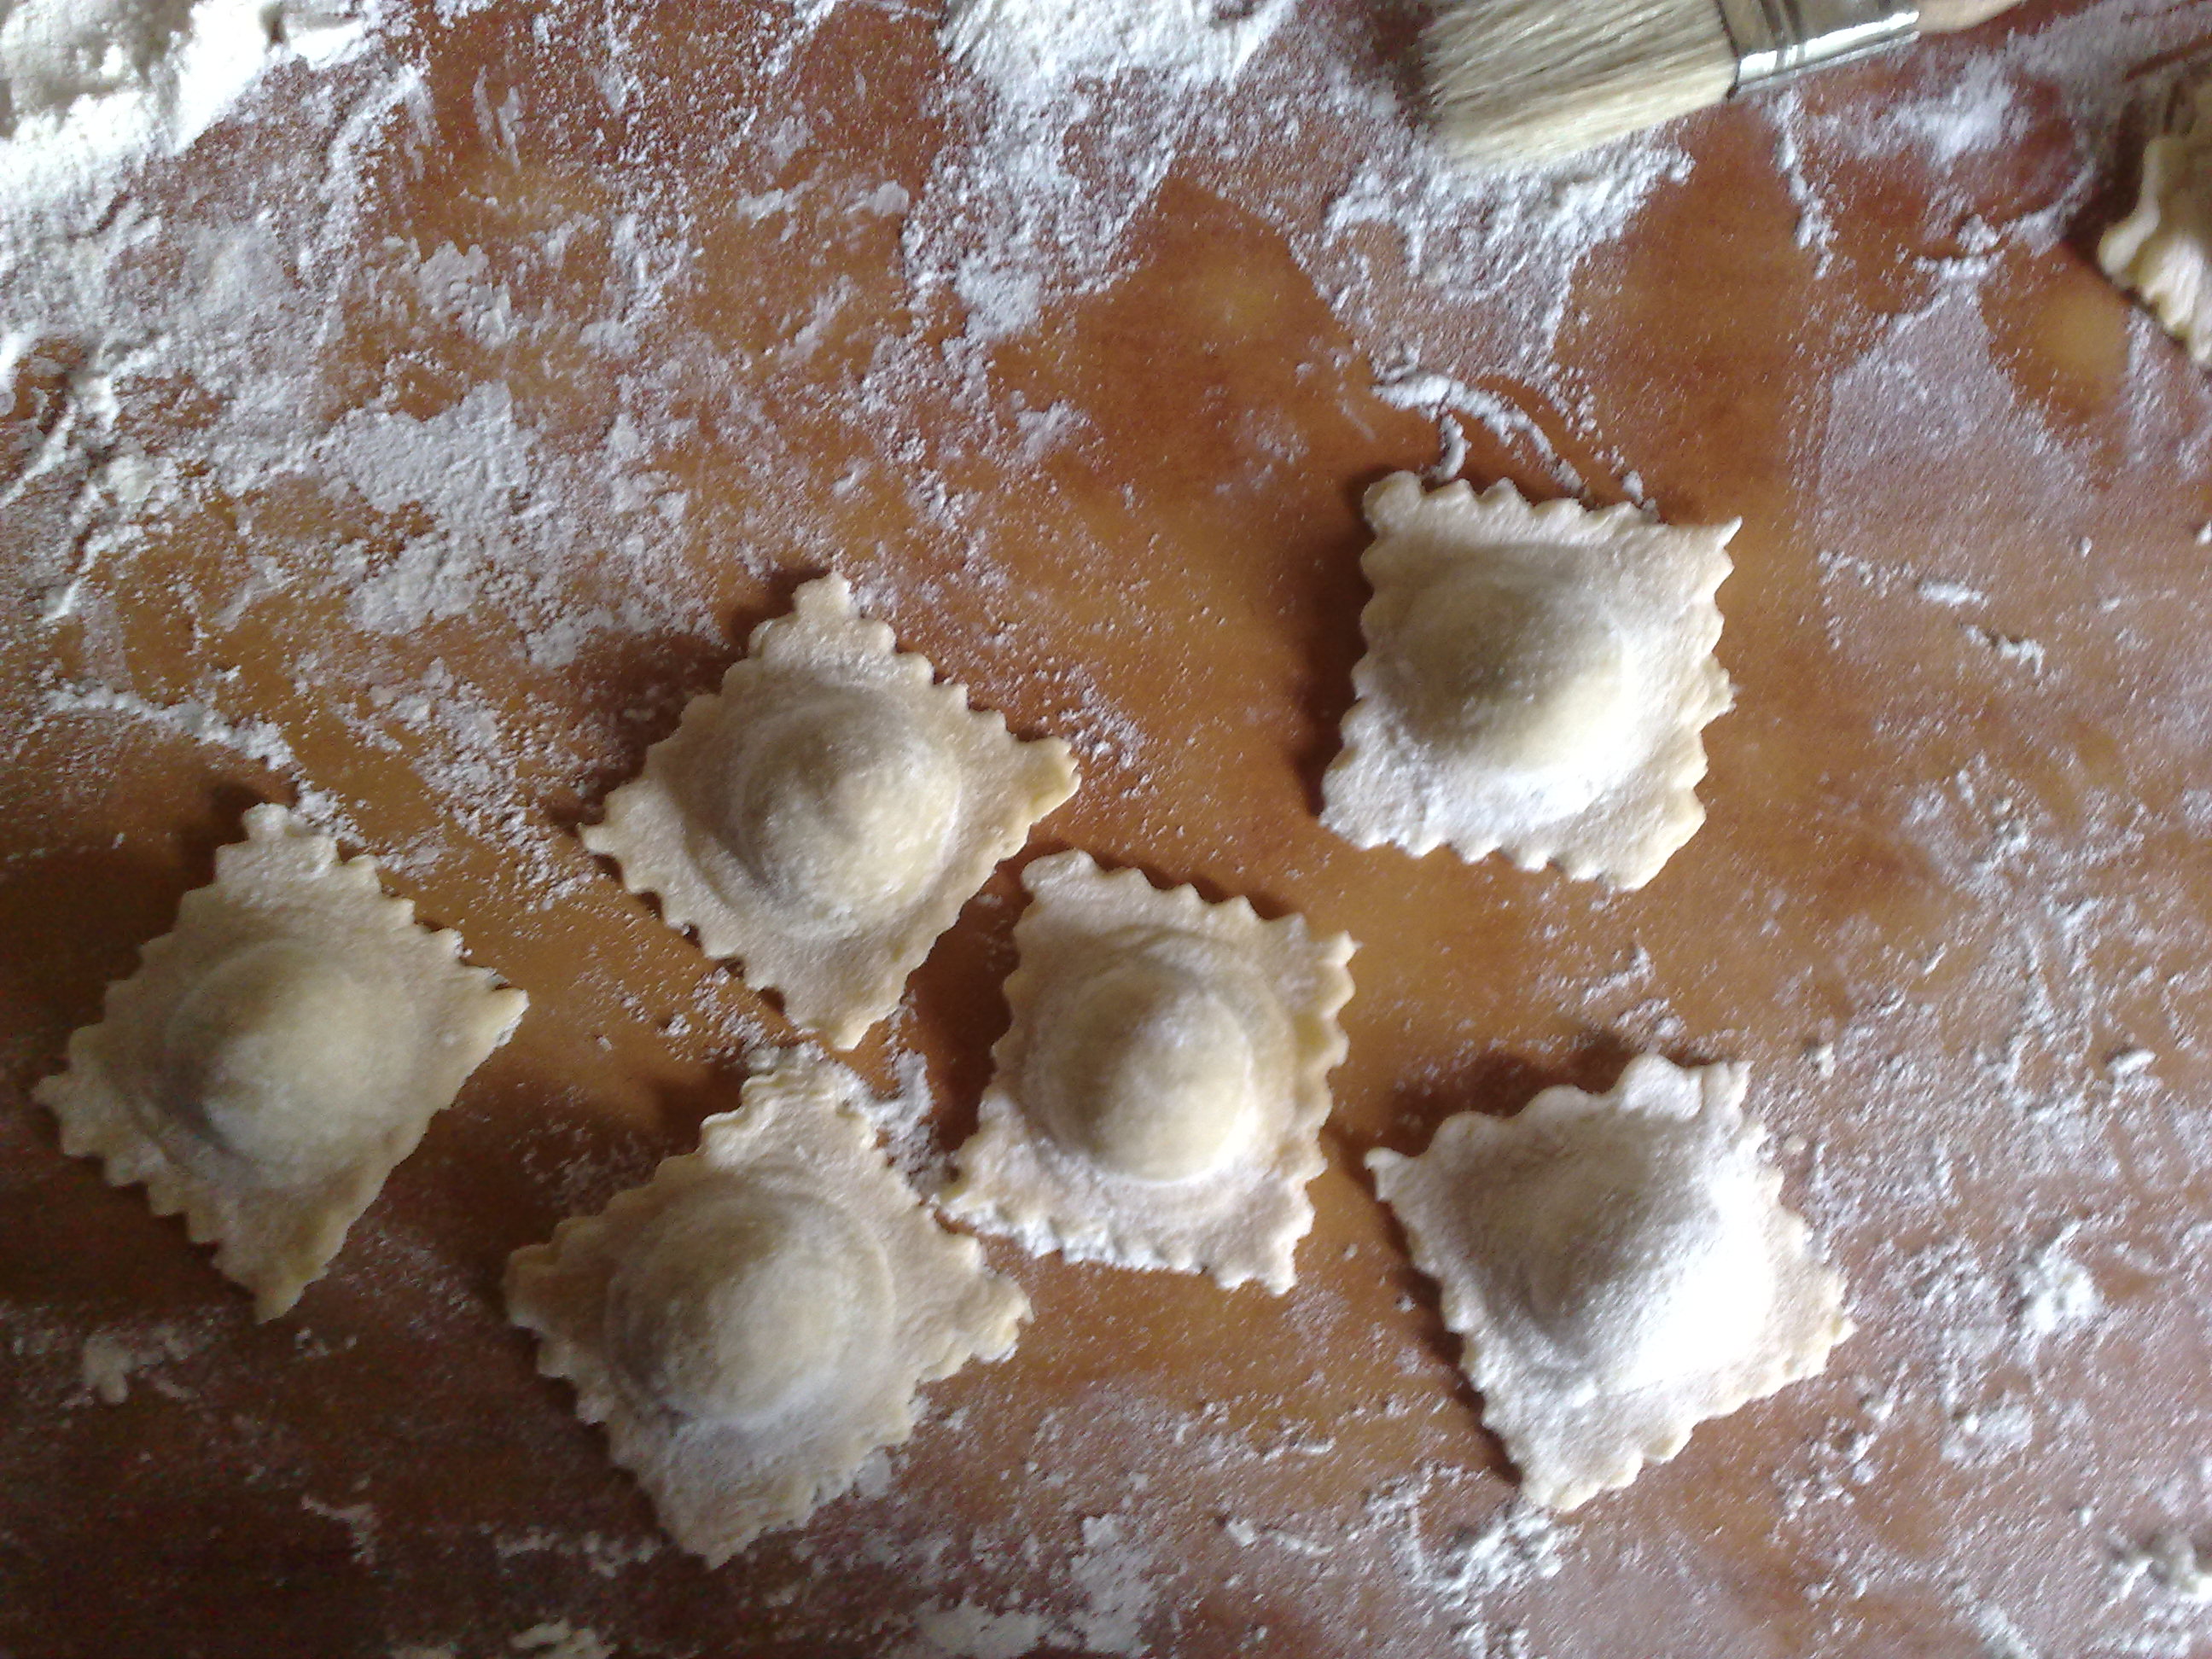 Homemade noodles, ravioli and everything for making them